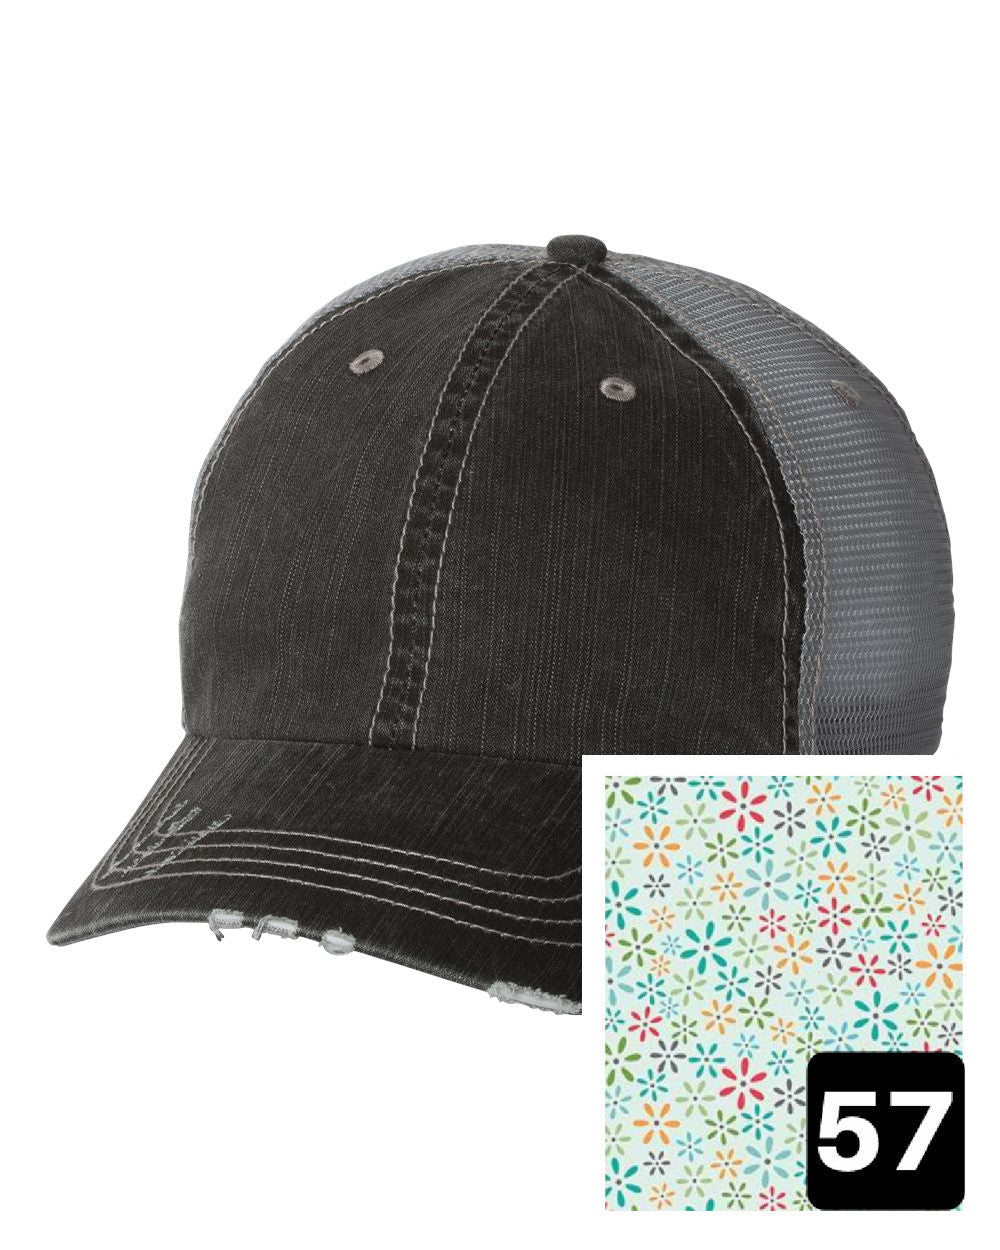 gray distressed trucker hat with white daisy on yellow fabric state of Iowa